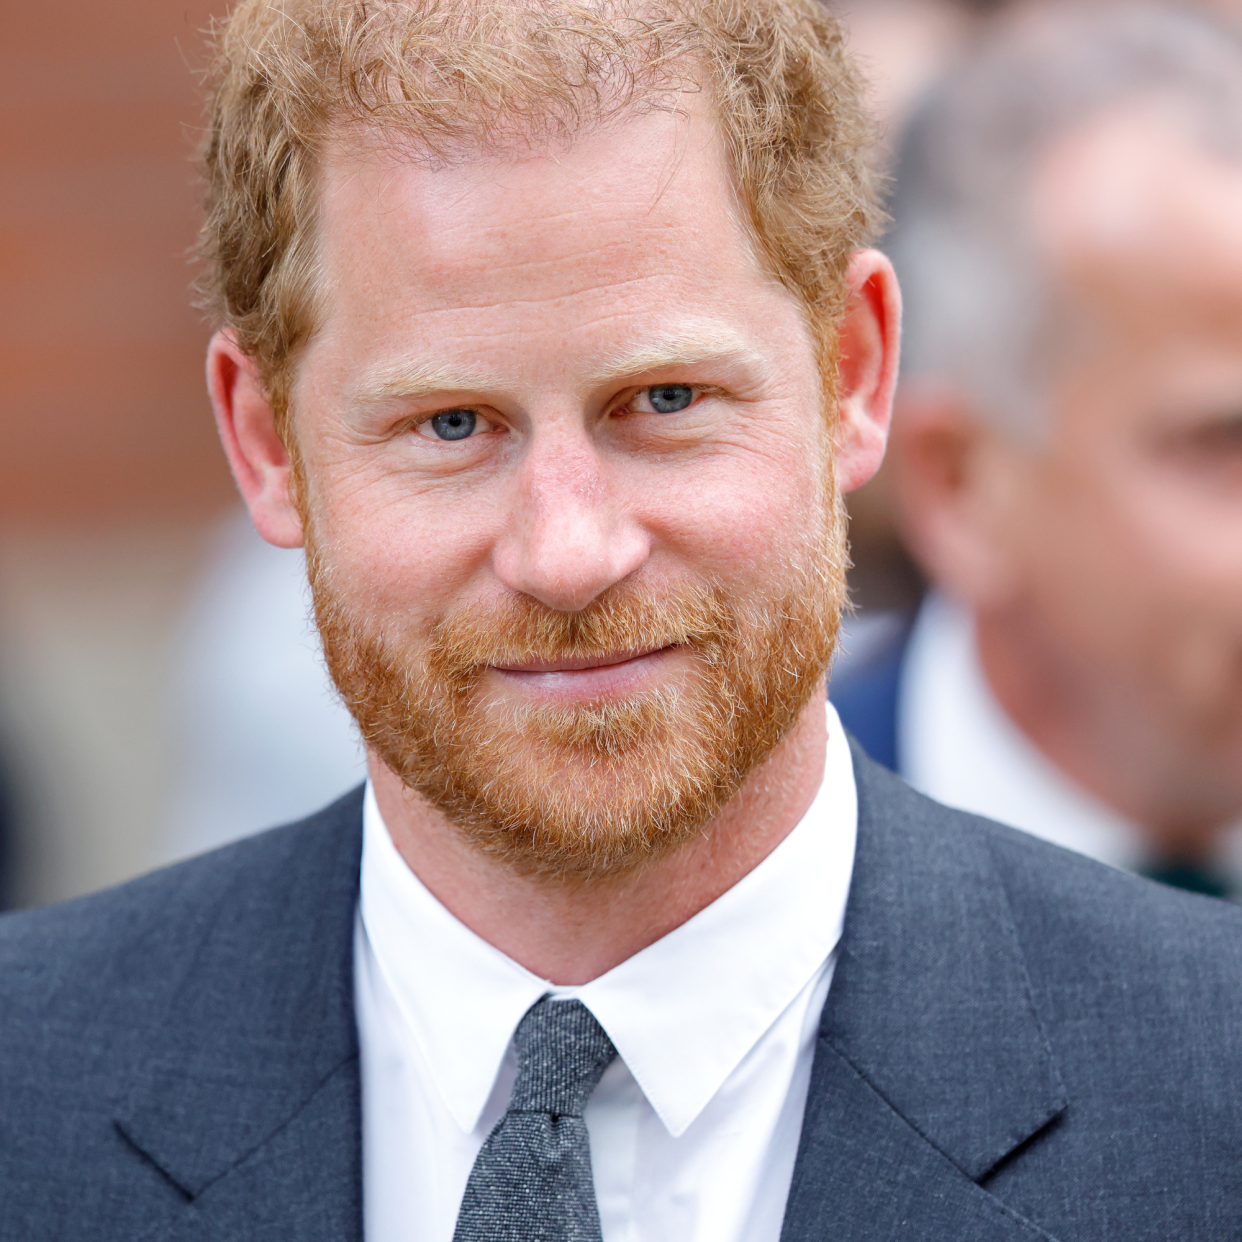  Prince Harry Court Case Enters Final Day. 